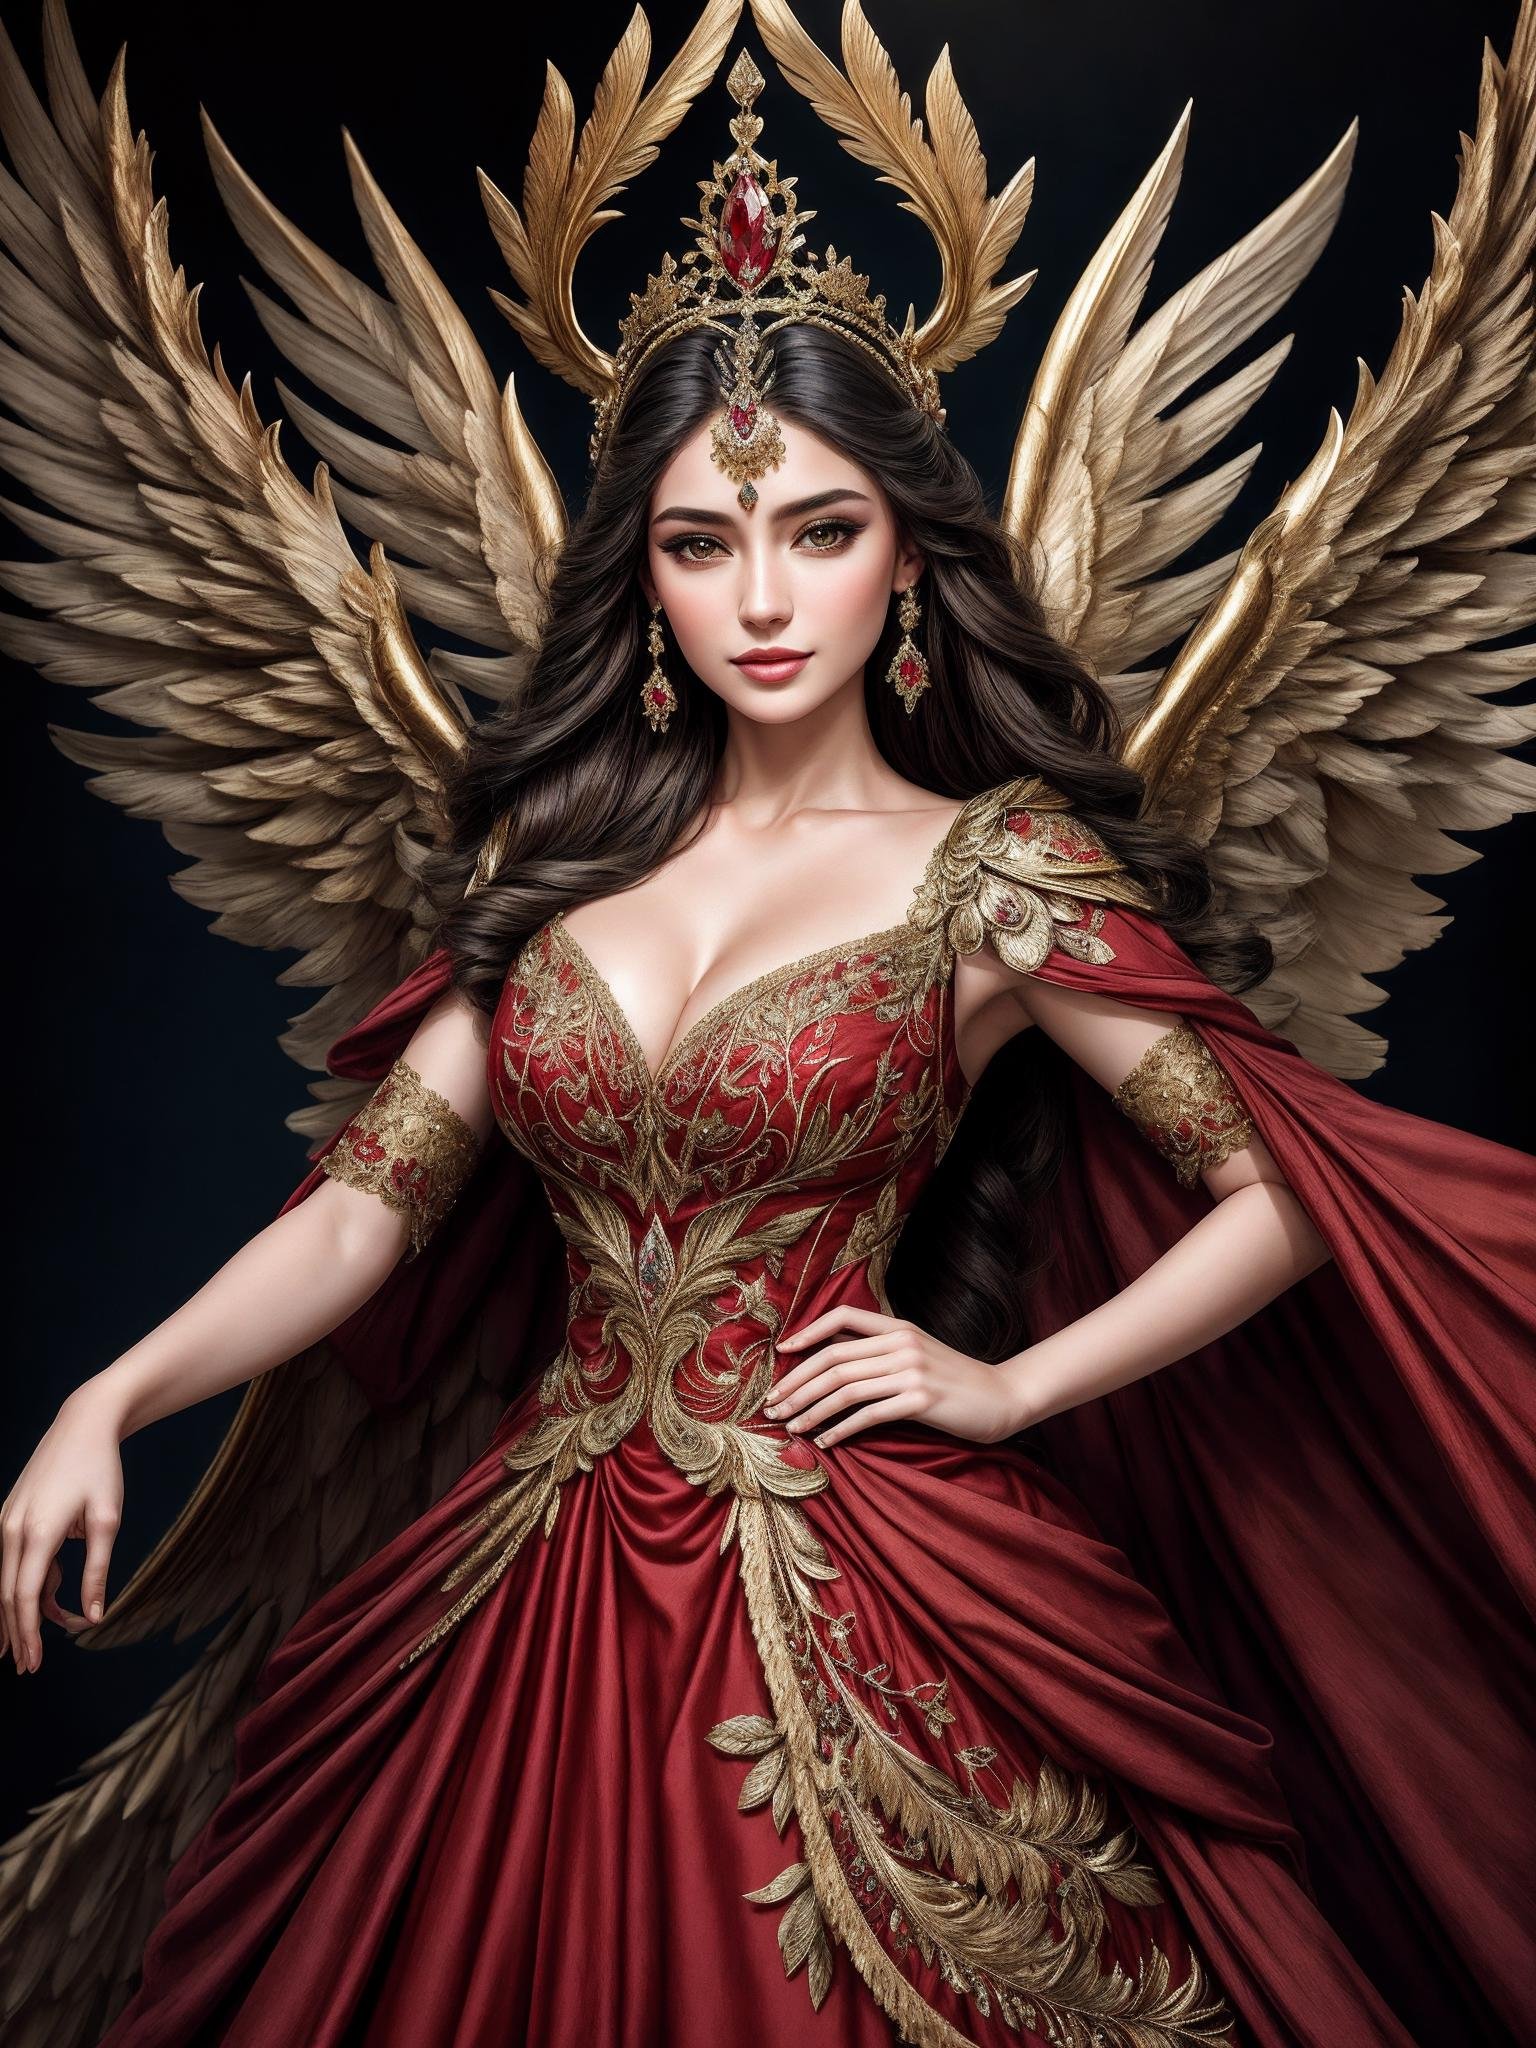 ((Masterpiece, best quality,photography, detailed skin, realistic, photo-realistic, 8k, highly detailed, full length frame, High detail RAW color art, diffused soft lighting, shallow depth of field, sharp focus, hyperrealism, cinematic lighting,close up)),smiling(edgGaruda_dress:1.2),Haute_Couture, a  bird_woman wearing [Haute_Couture|edgGaruda_dress]  designer dress ,ruby crown, floral embroidery,hand on hip,((front view, fashion show background)) <lora:edgLycorisGaruda:0.8>